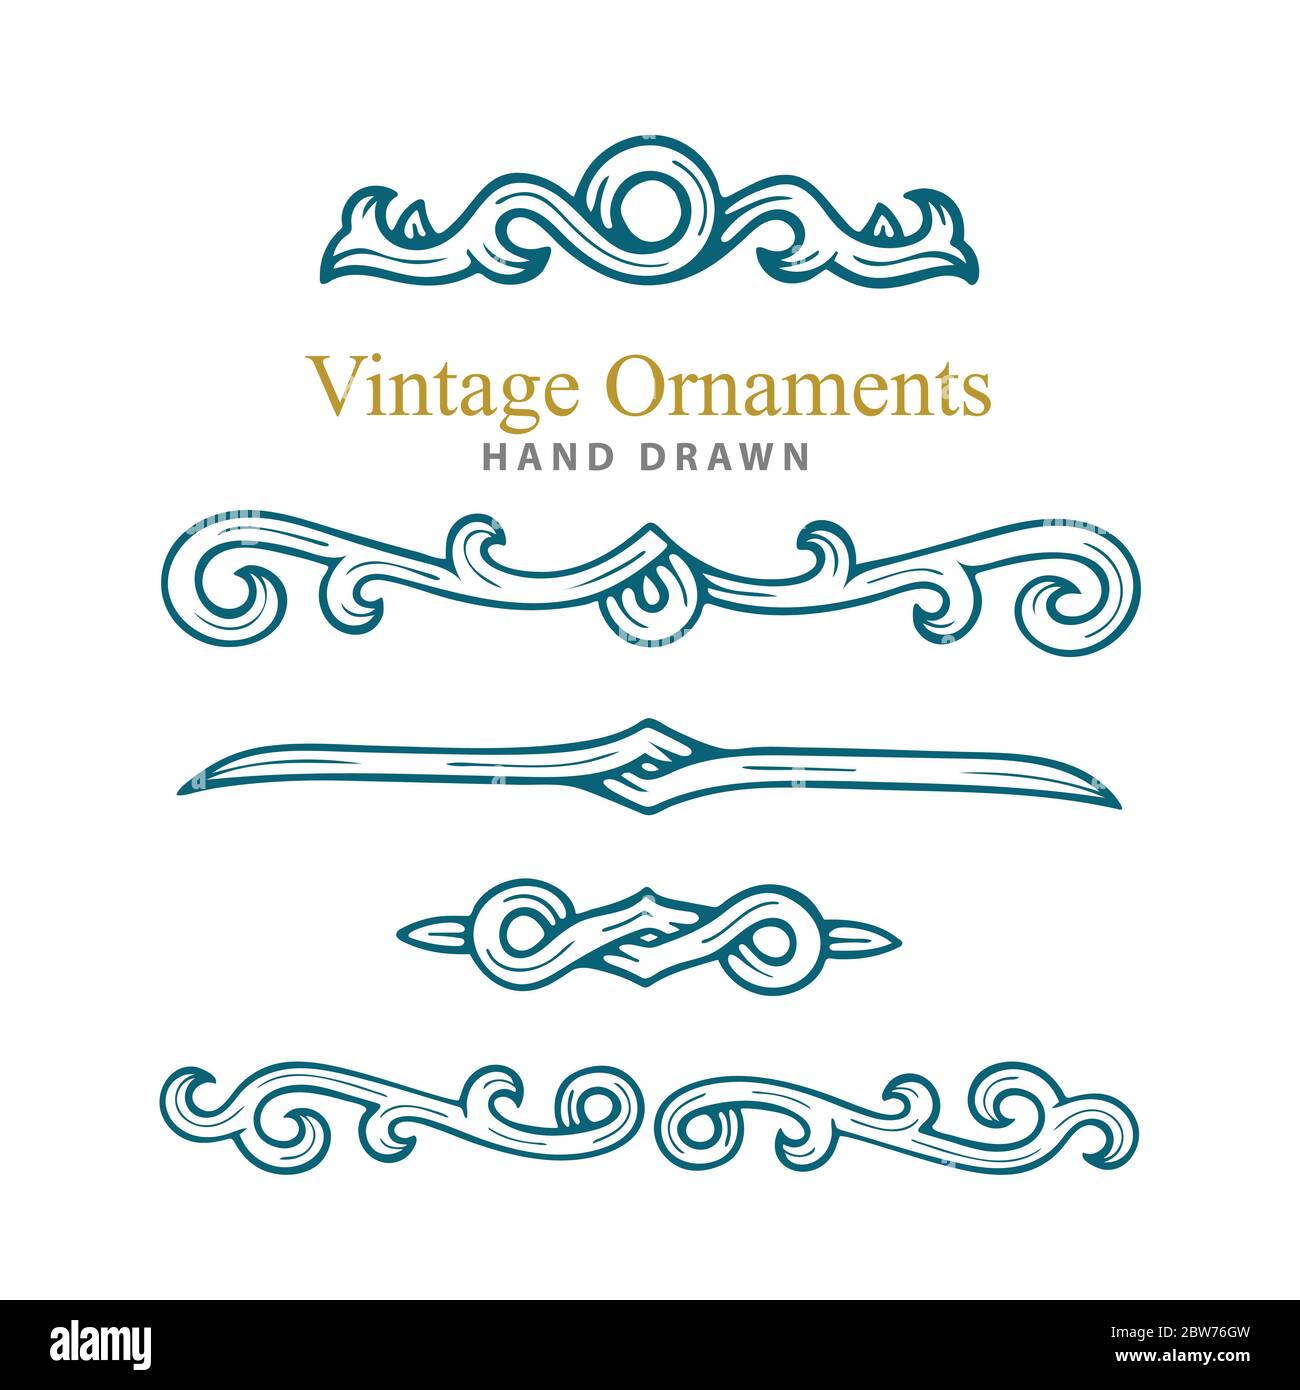 Vintage ornaments set. Hand drawn engraved style vector divides and decorative elements. Part of set. Stock Vector